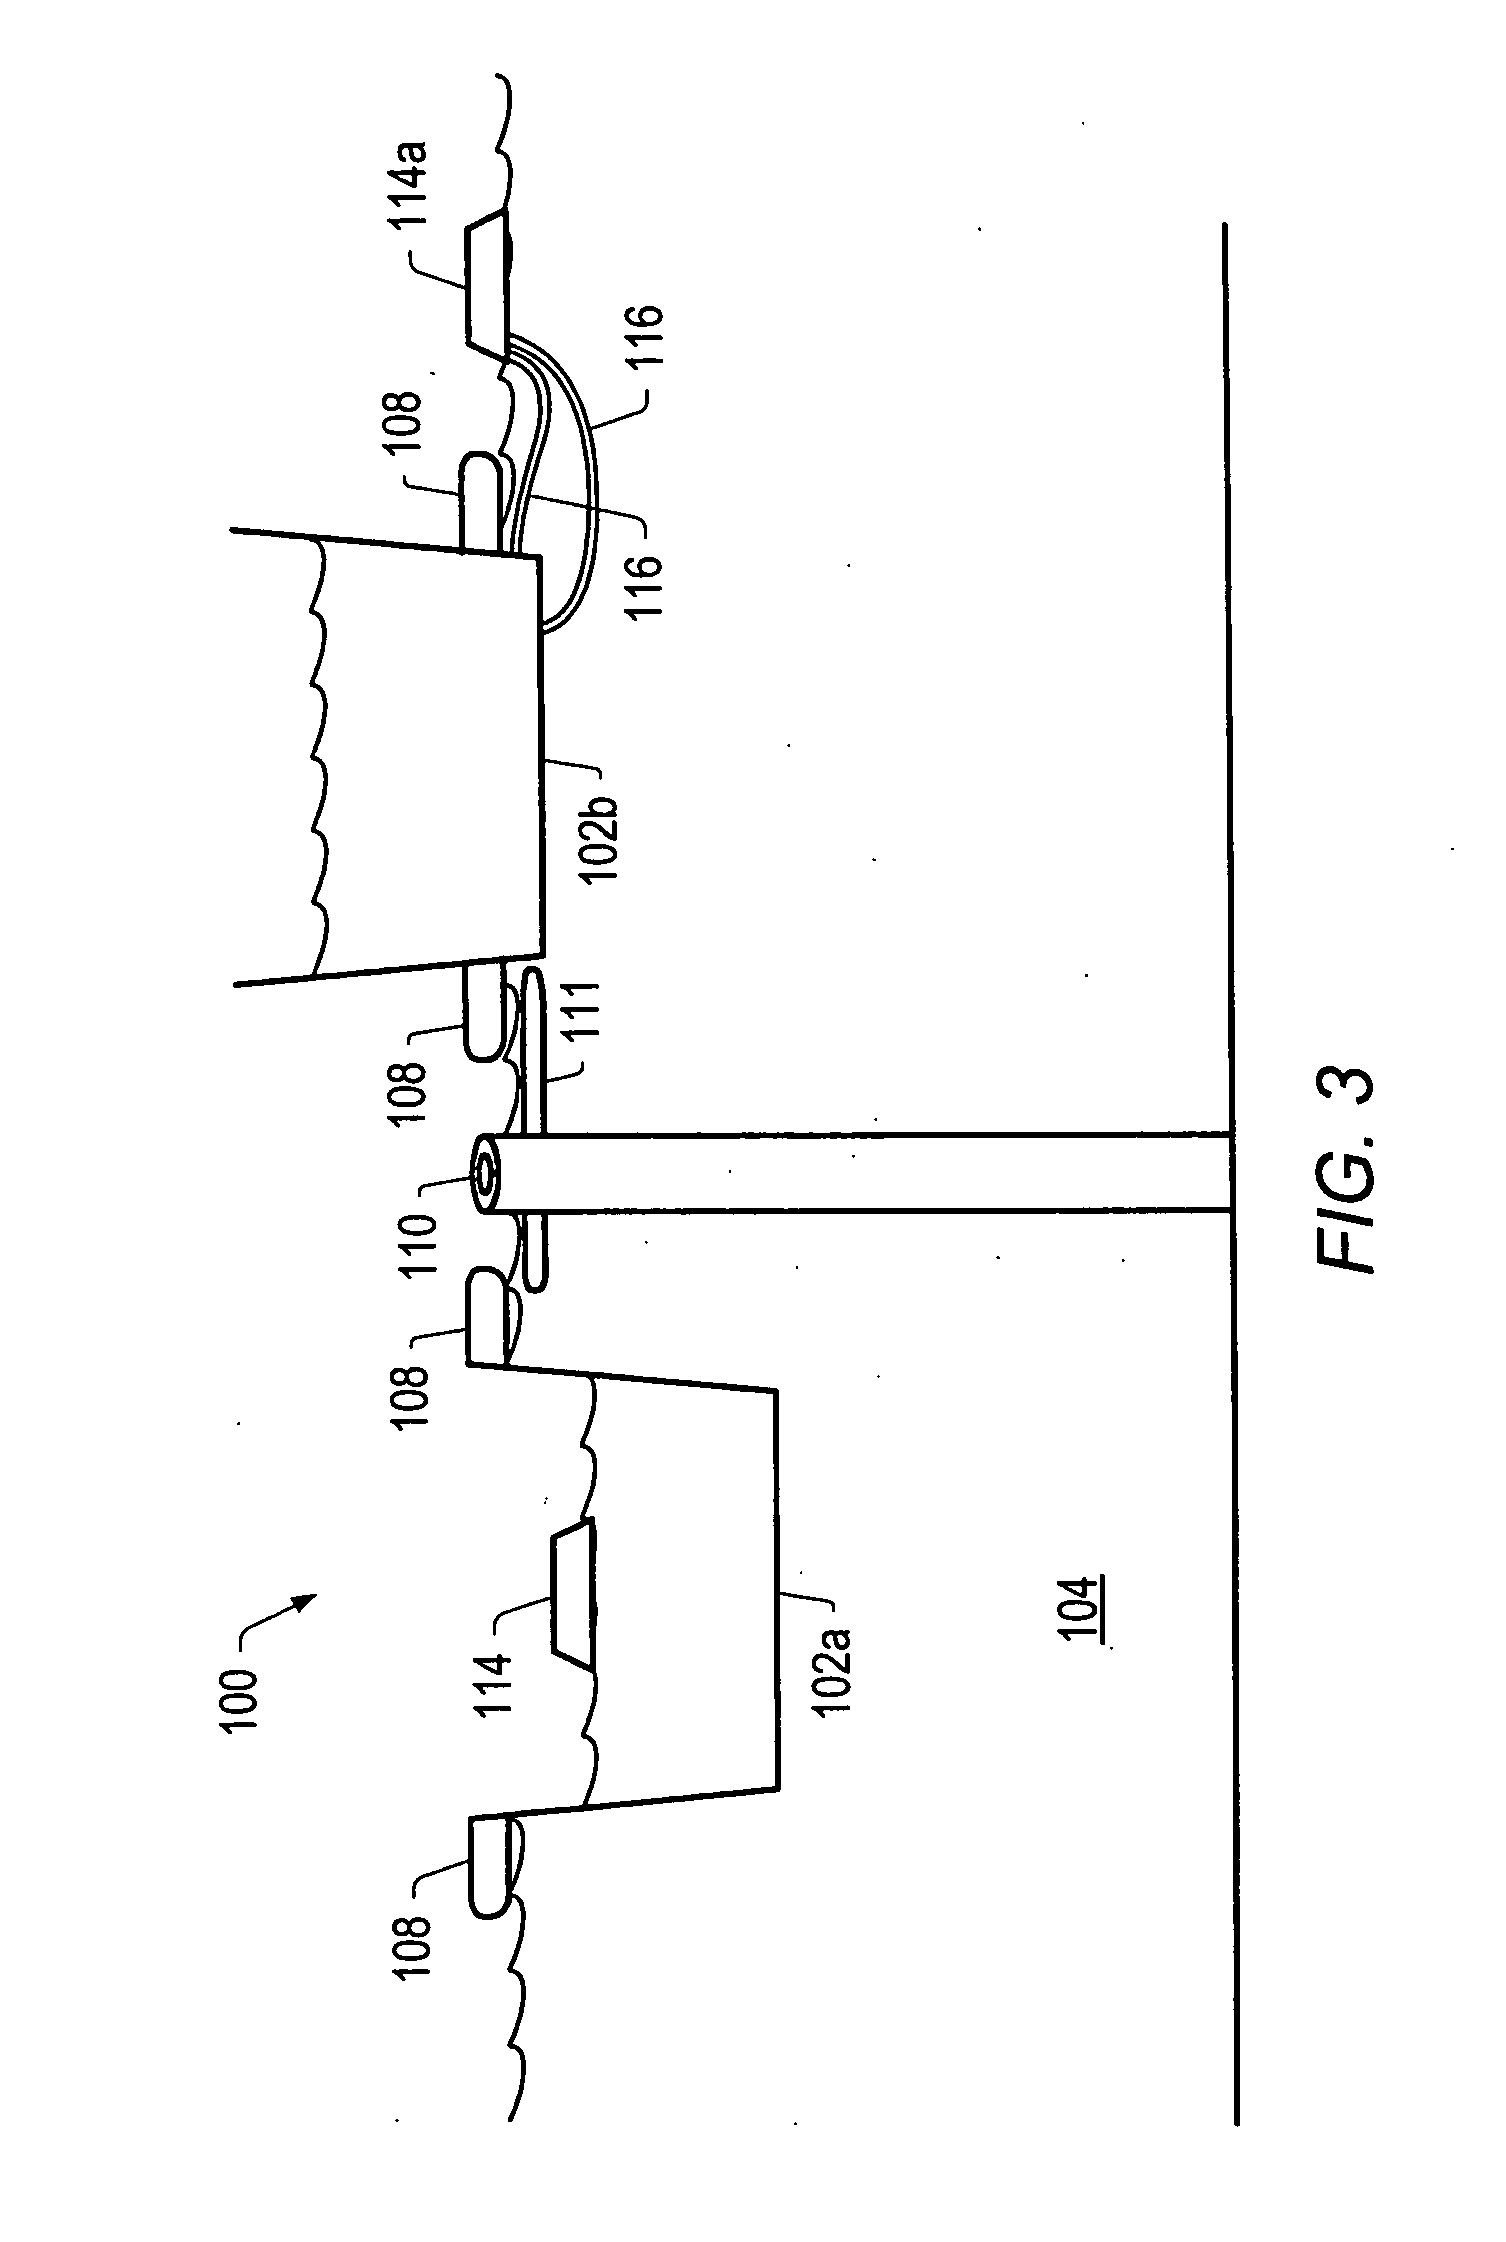 Methods and systems for thermal control systems for self-contained floating marine parks